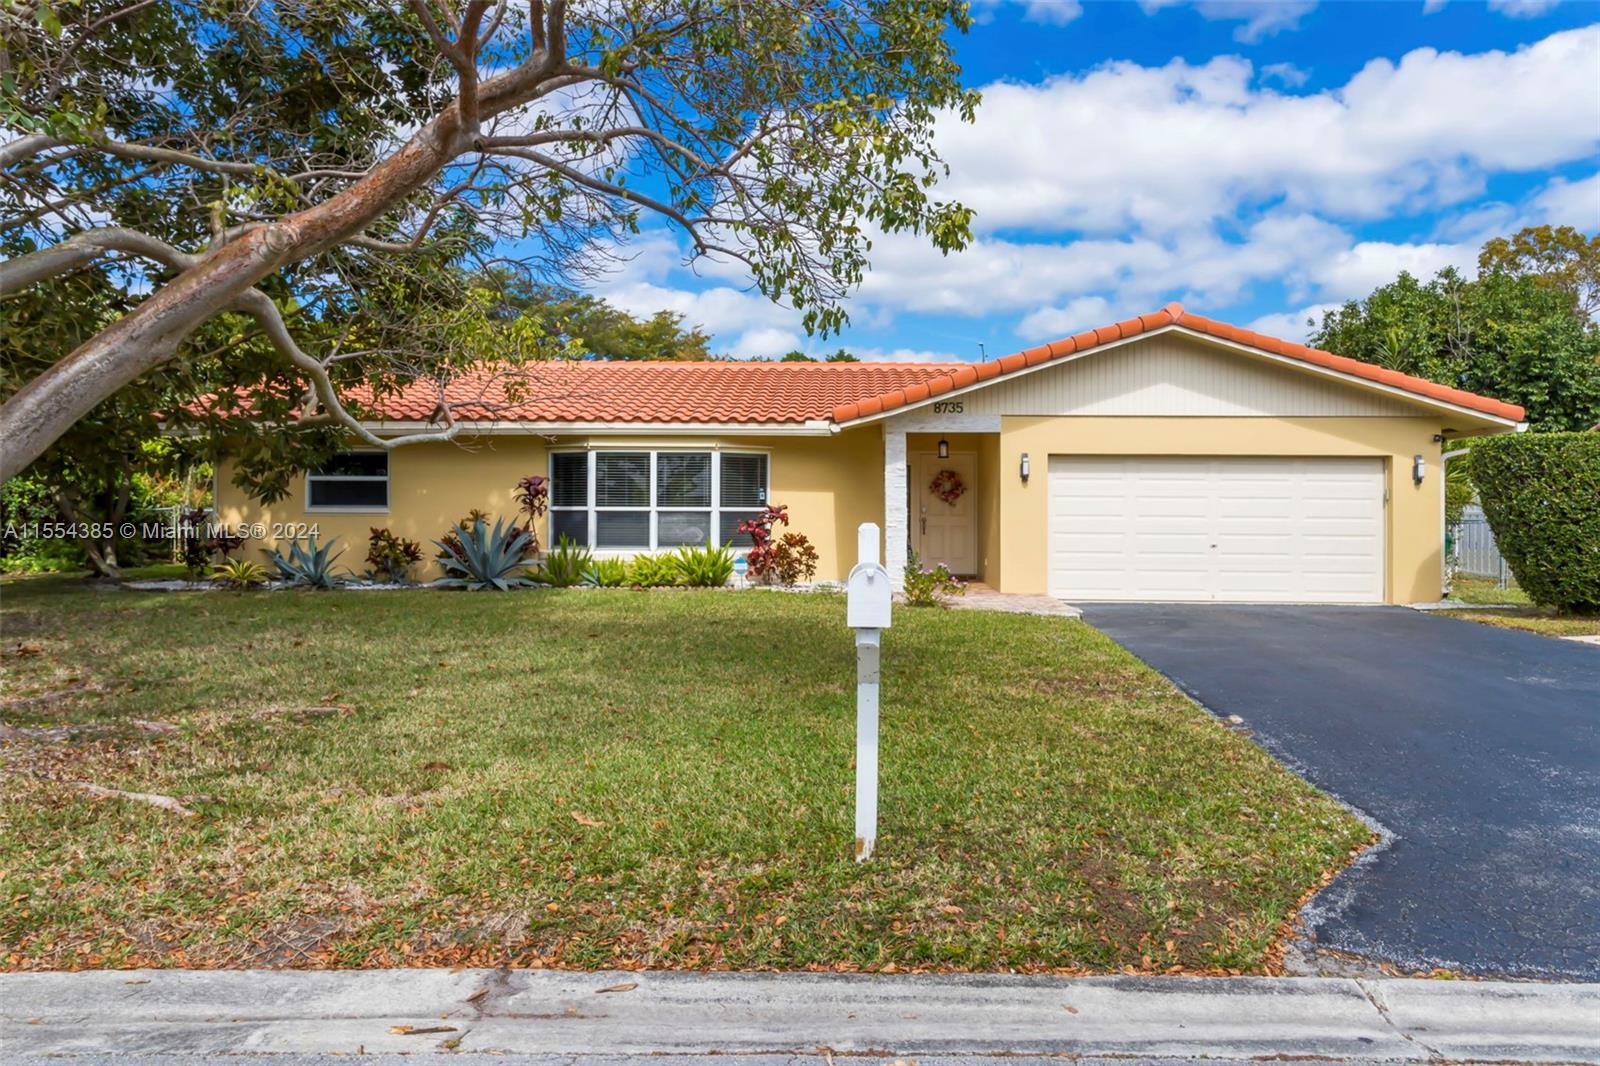 8735 NW 29th Dr, Coral Springs, FL 33065